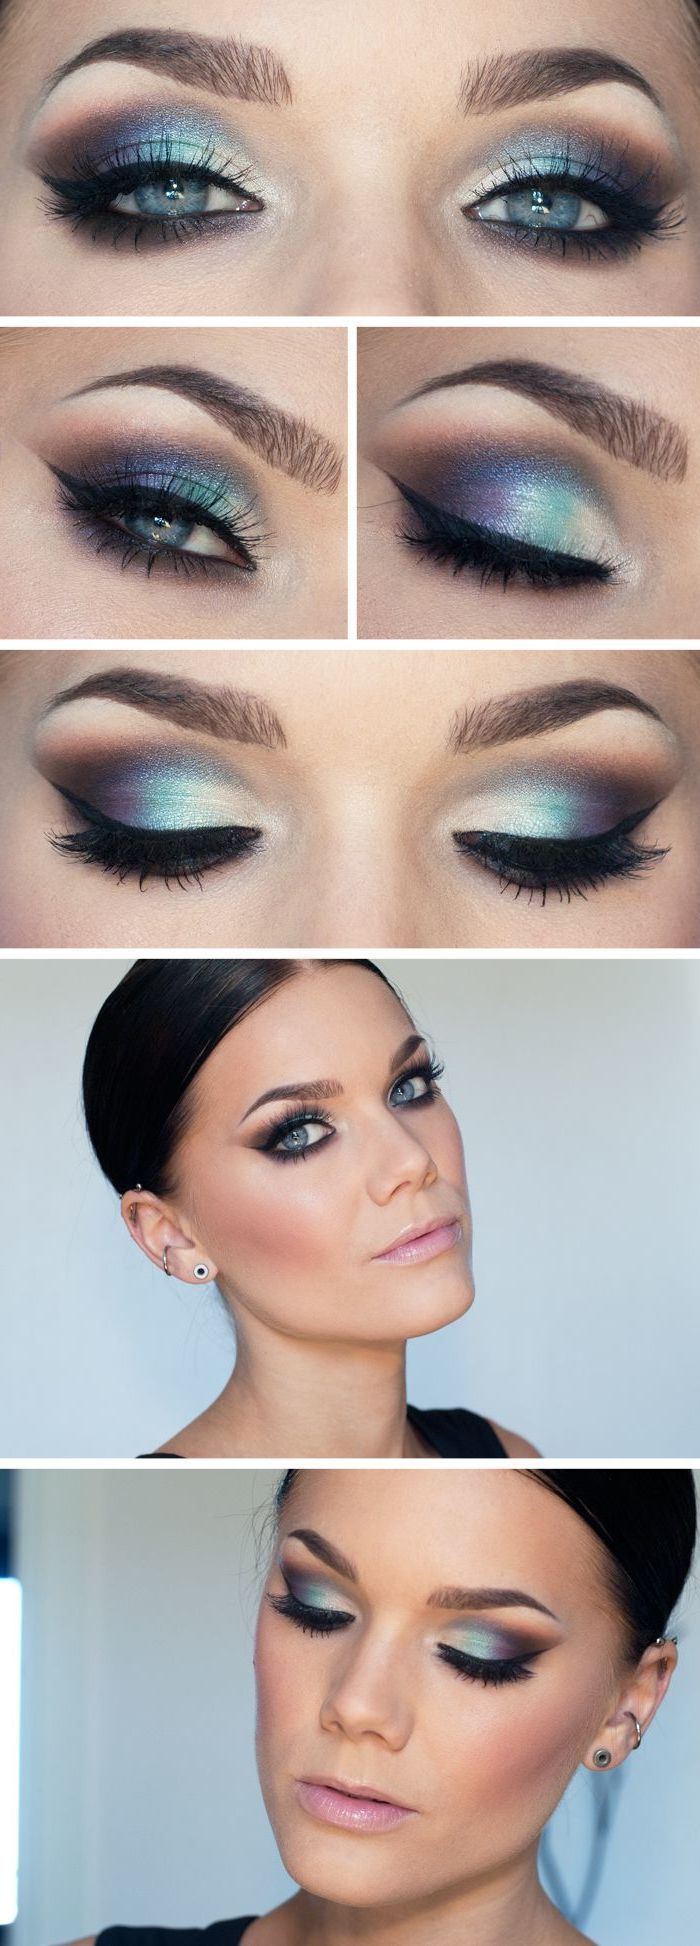 New-Years-Eve-make-up-10-tips-for-brown-and-blue.jpg